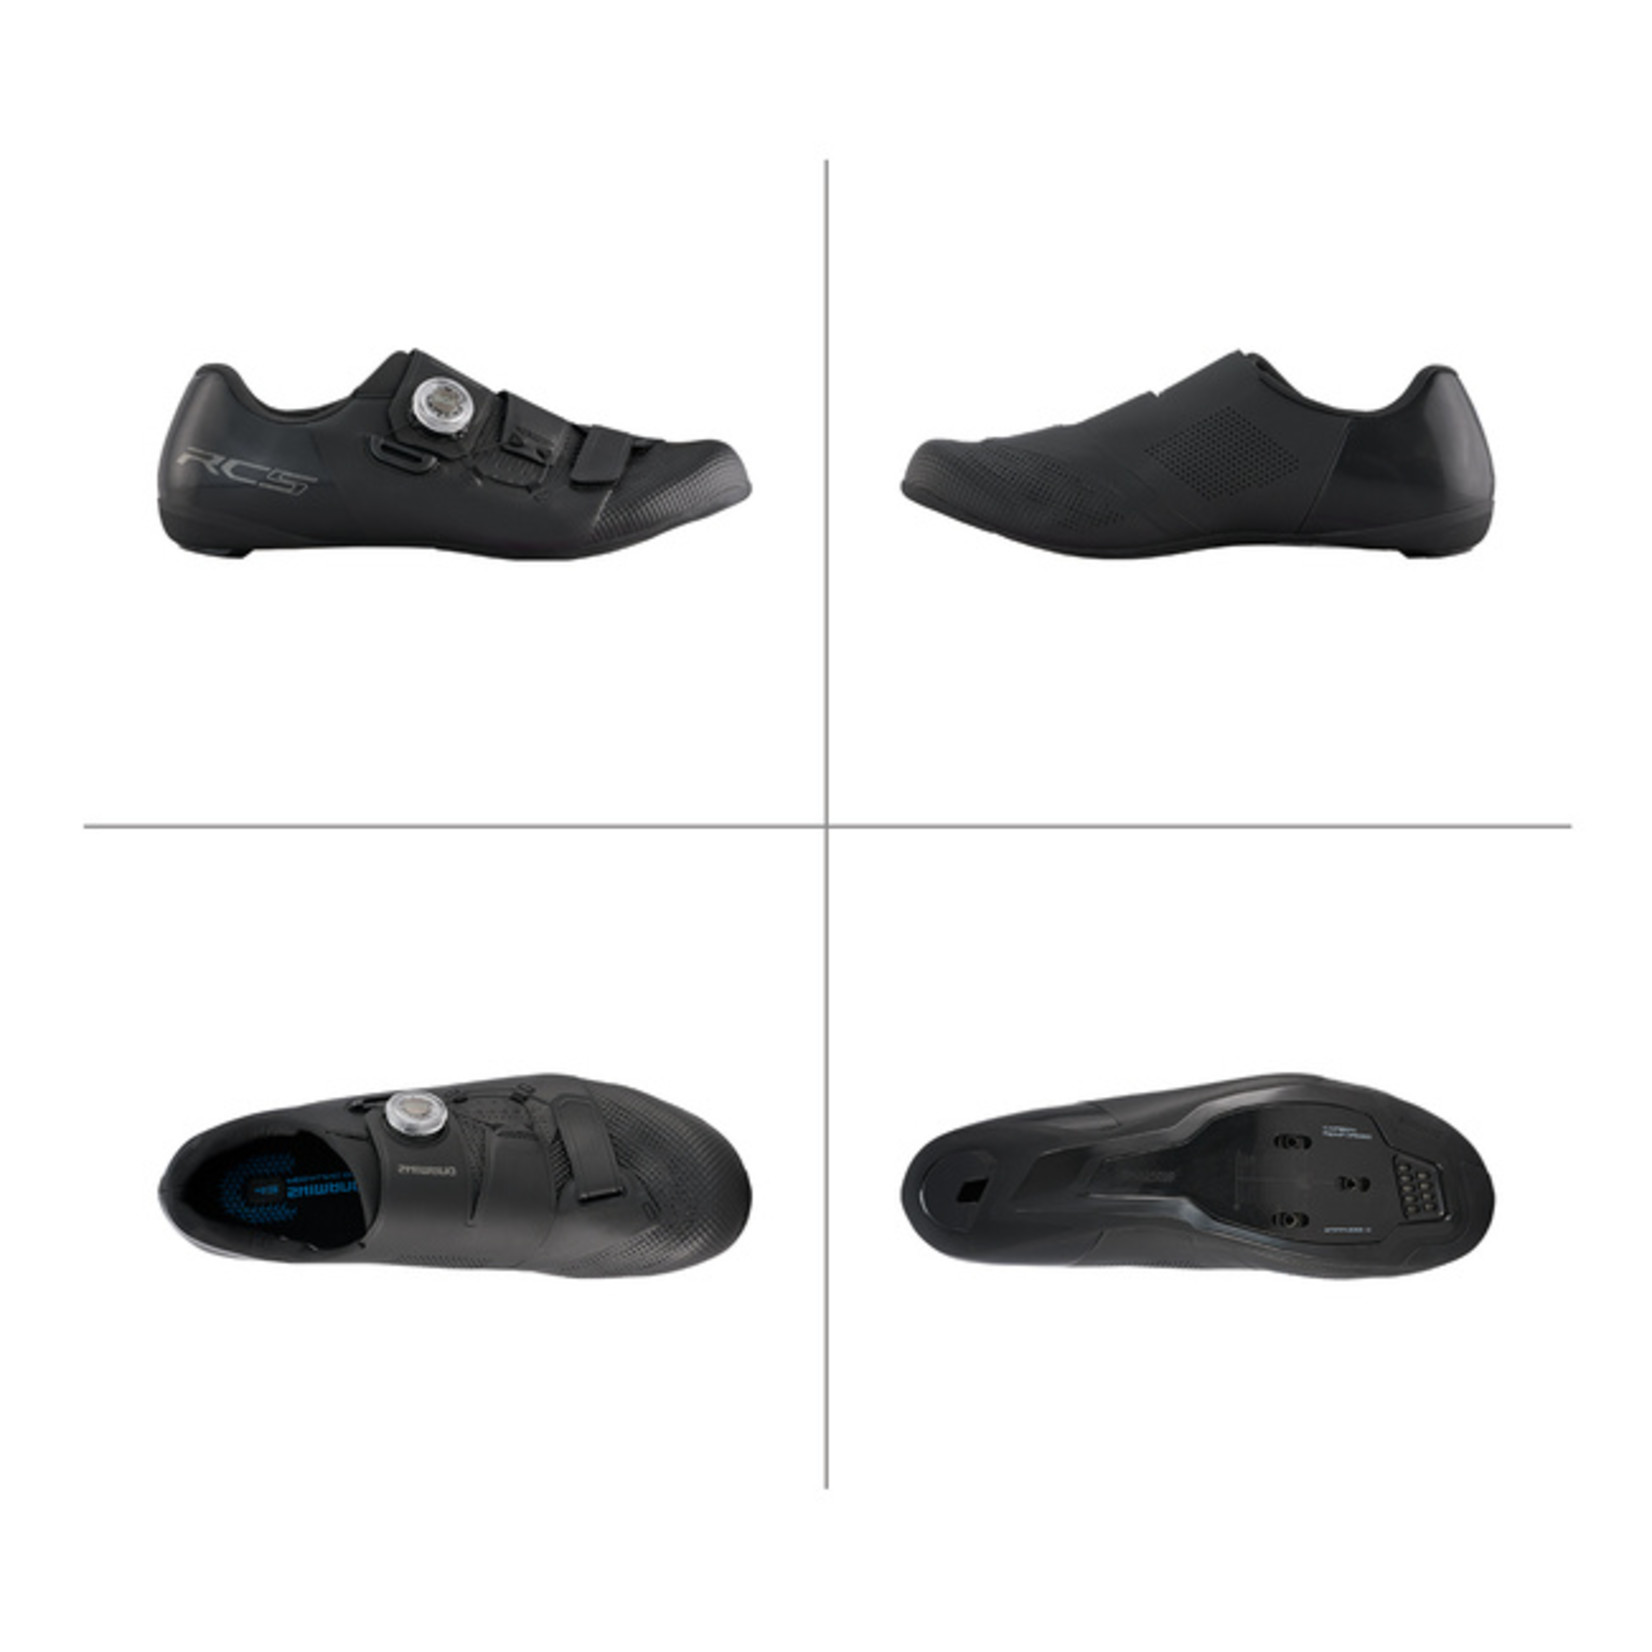 SHIMANO SH-RC502 WIDE BICYCLE SHOES